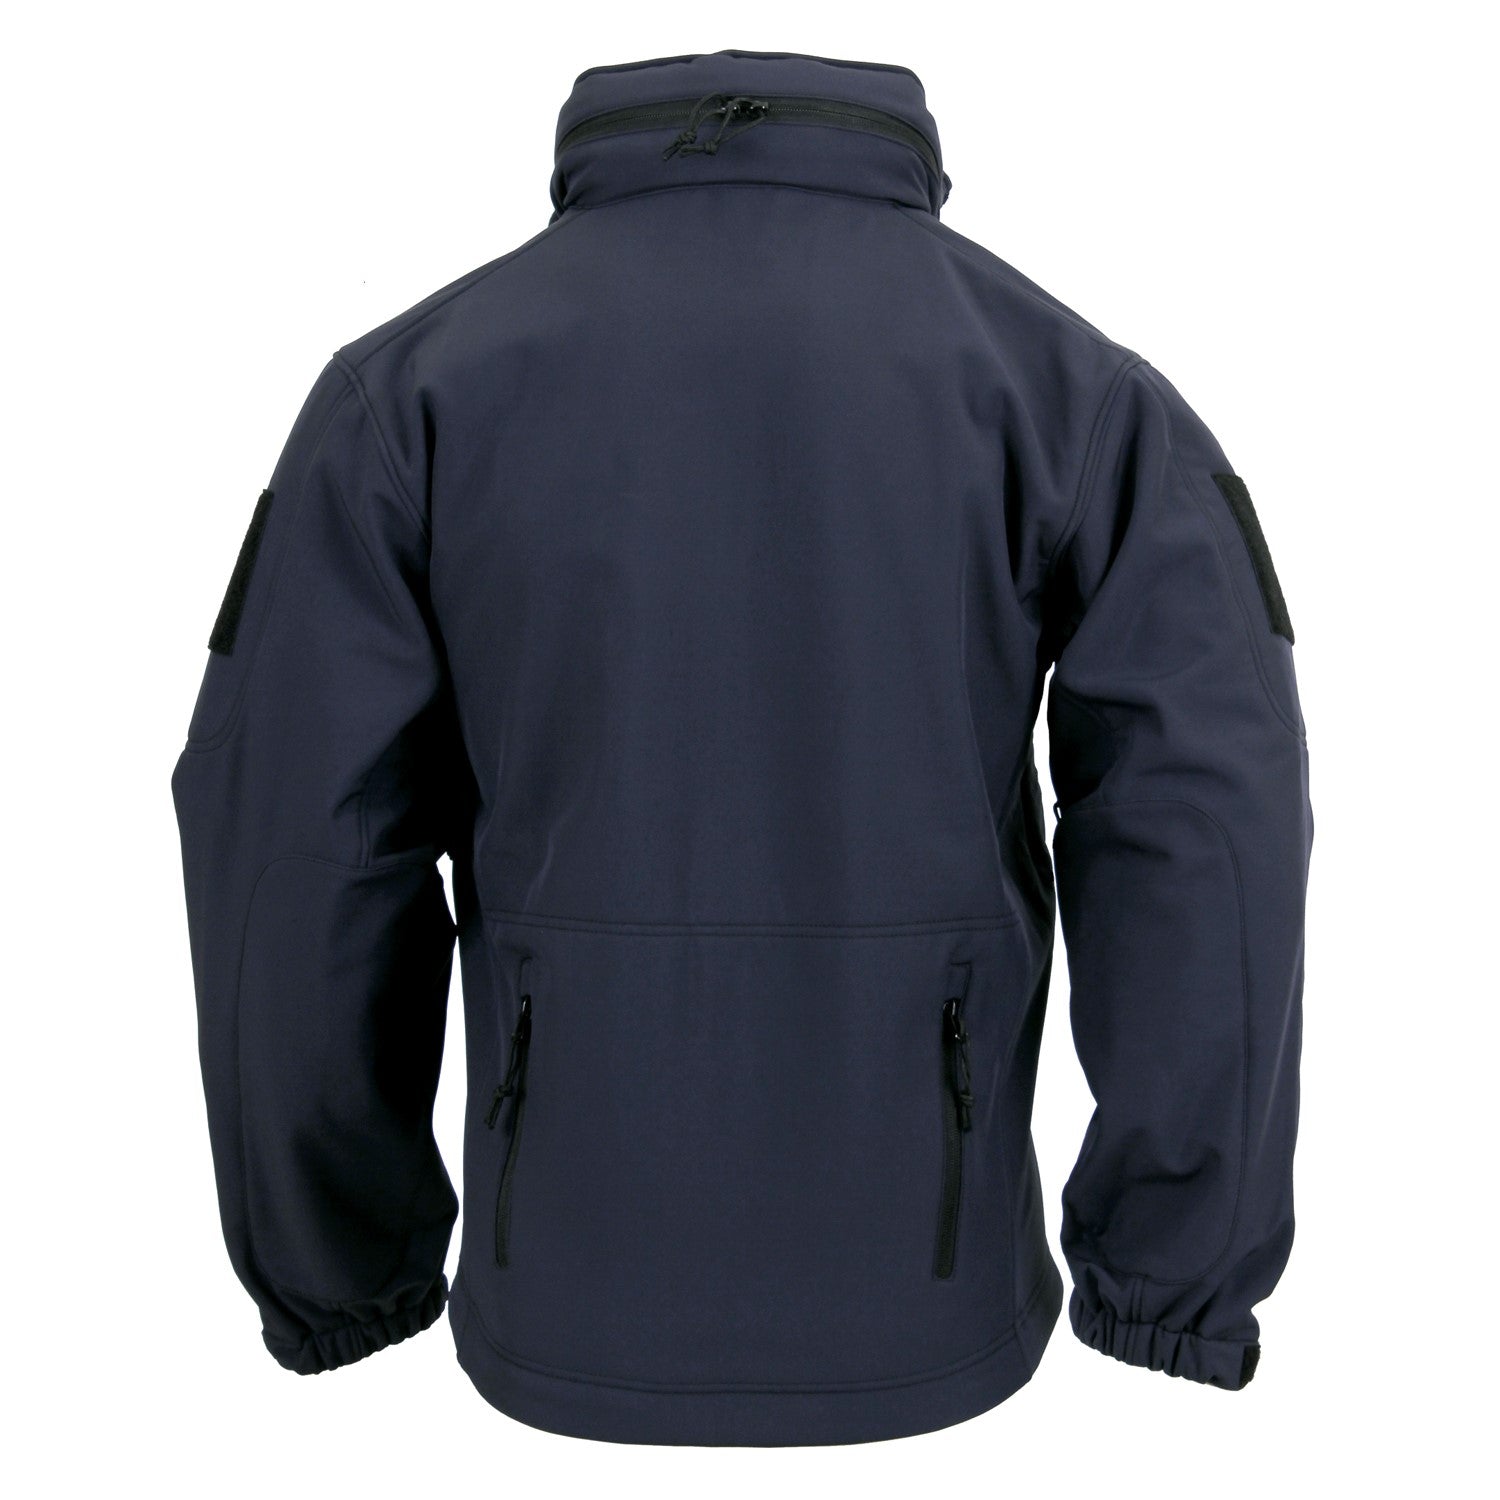 Rothco Mens Concealed Carry Soft Shell Jacket - 3XL